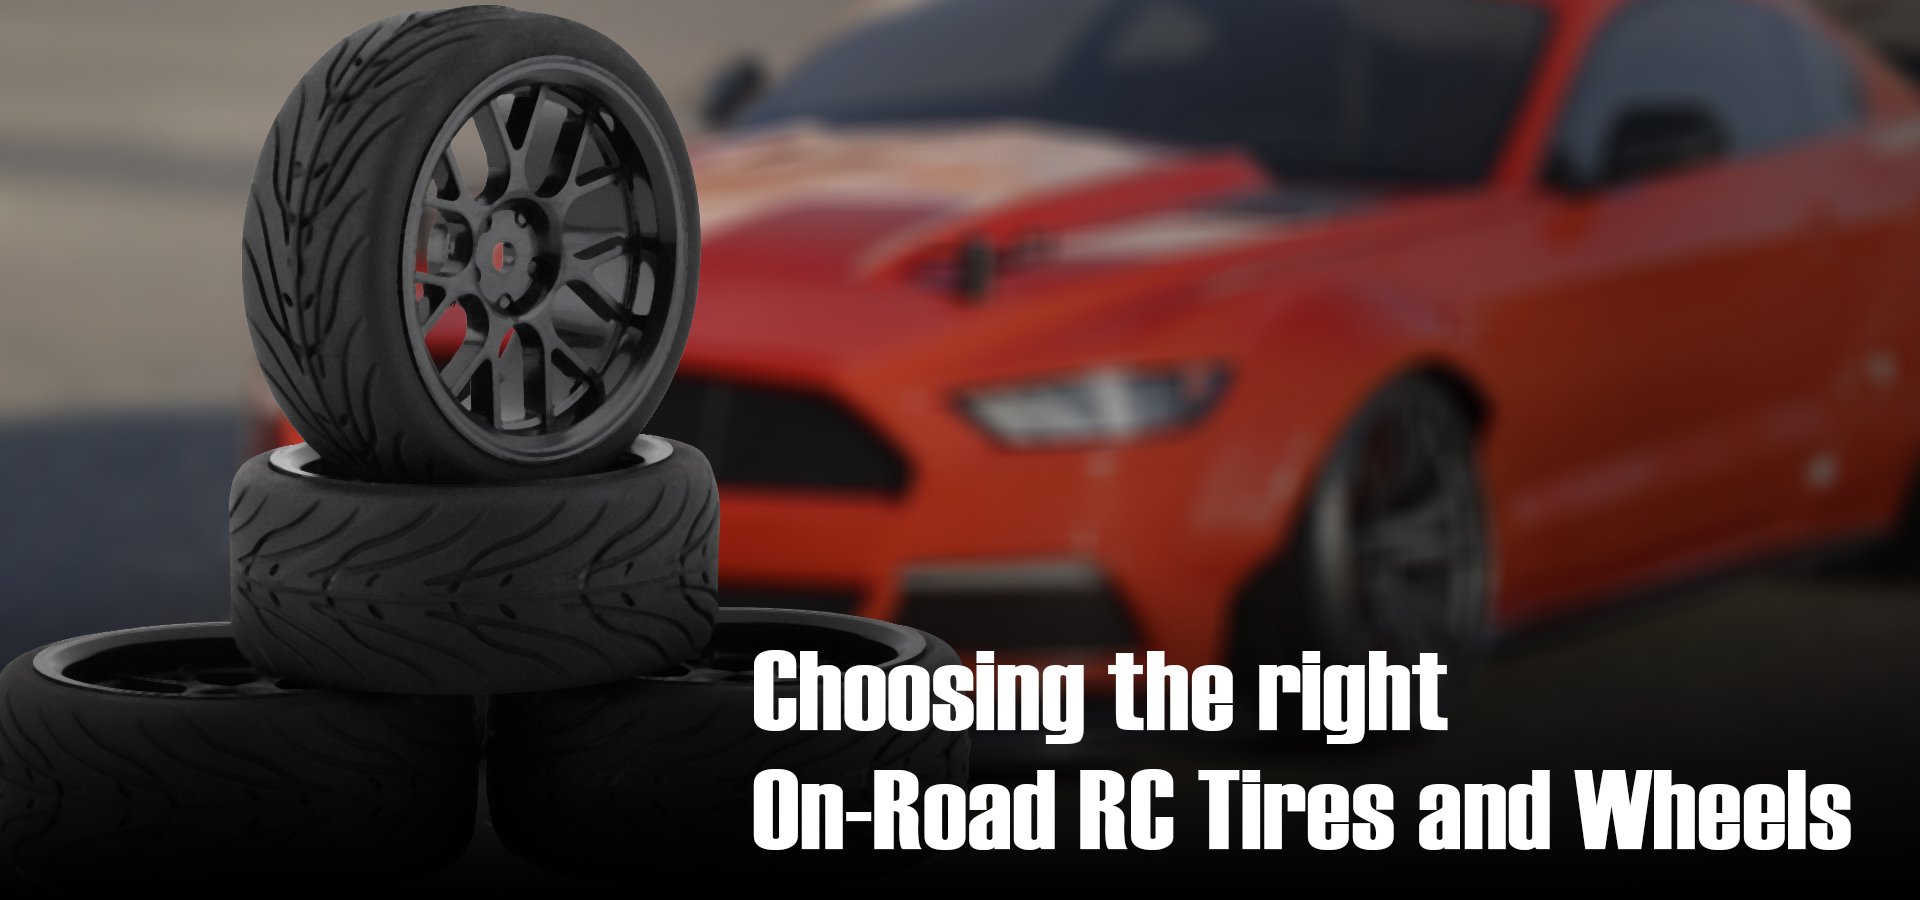 Choosing the Right On-Road RC Car Tires and Wheels